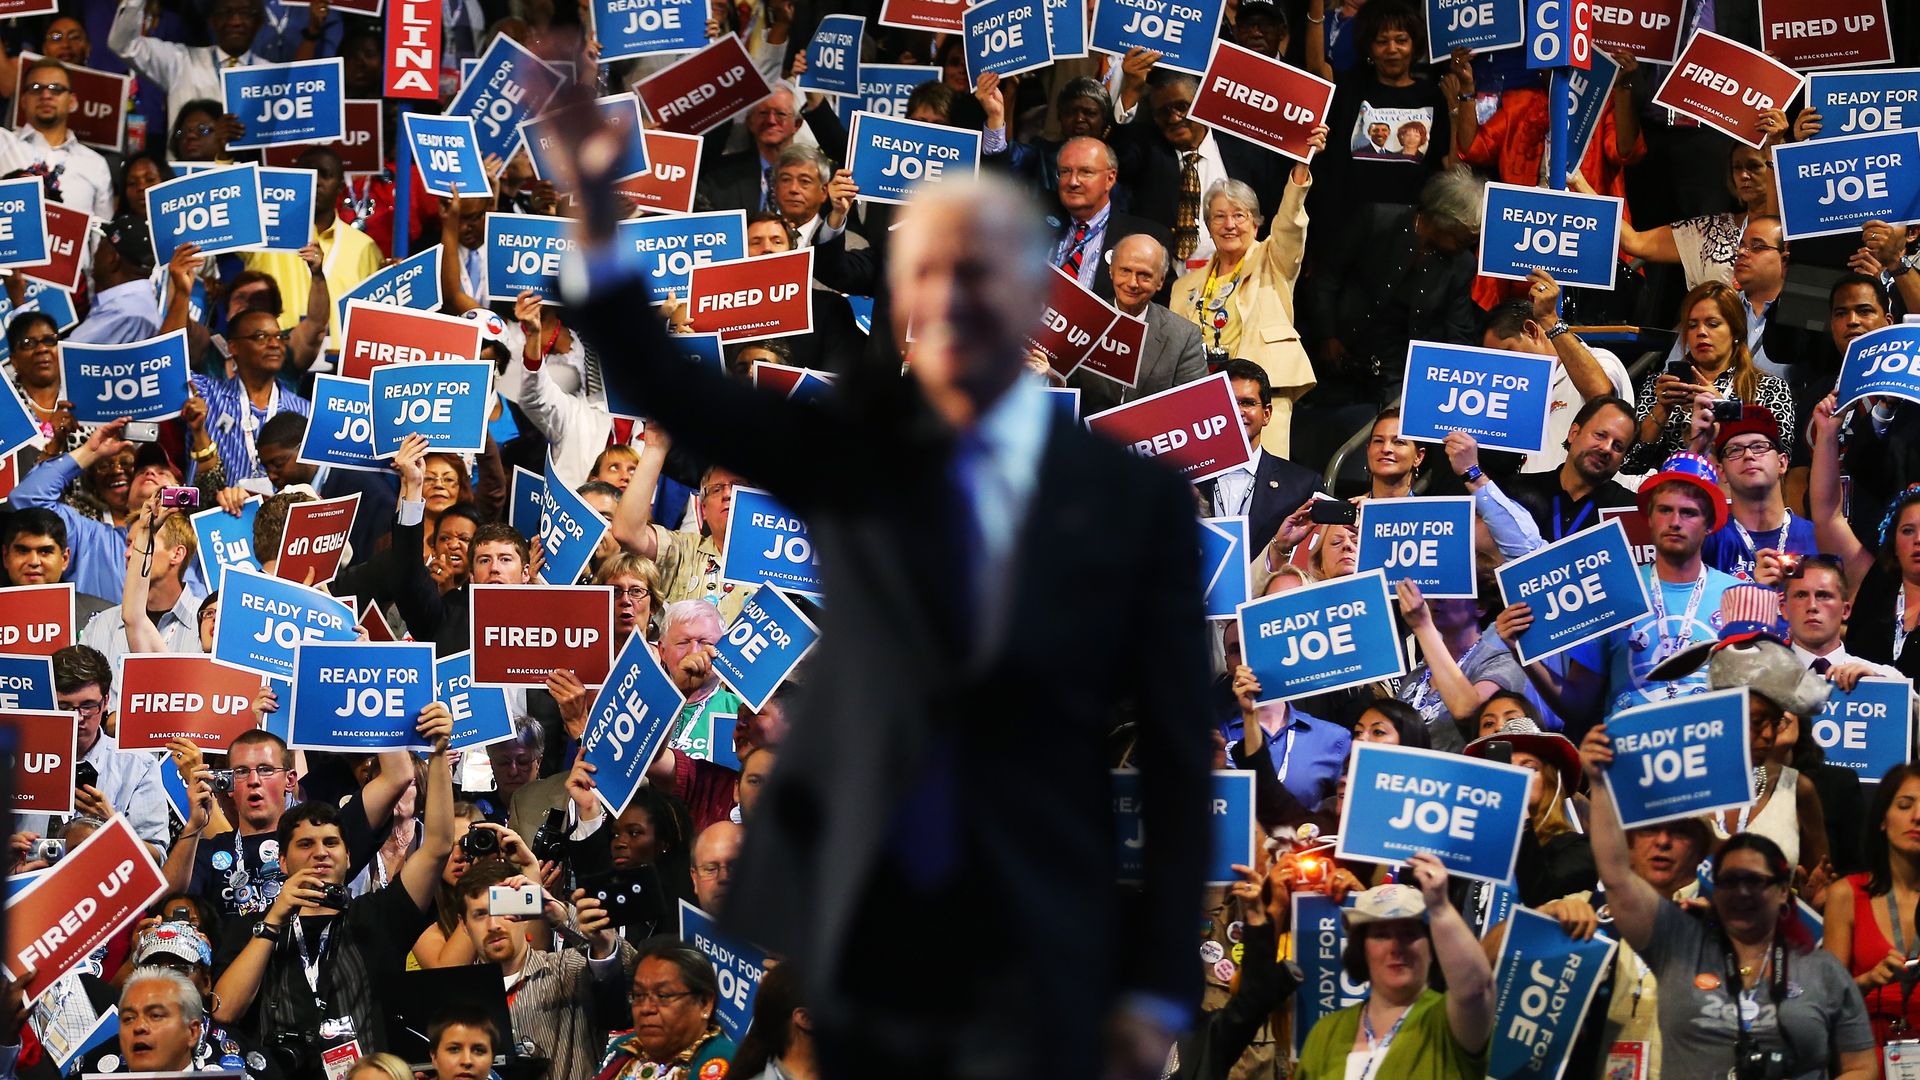 Joe Biden in front of a crowd at a rally.